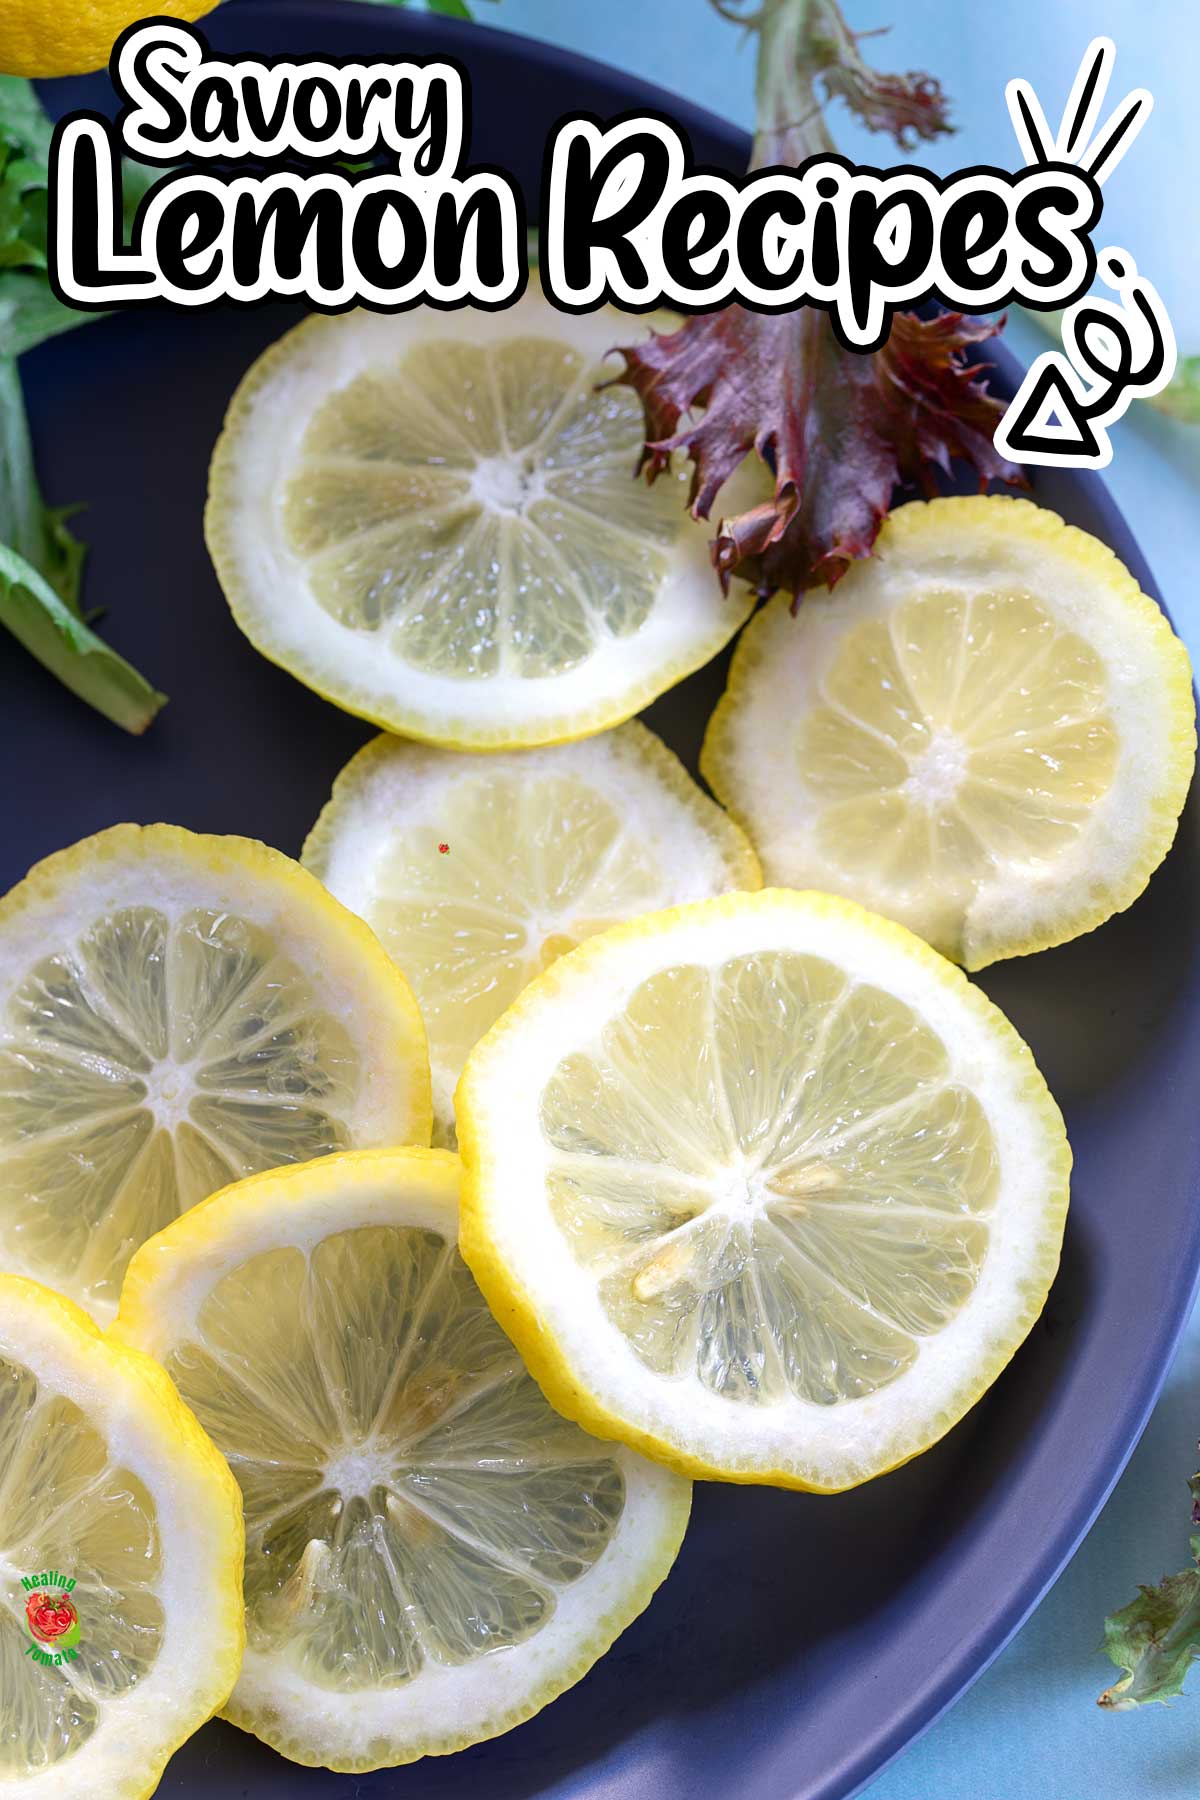 Top and closeup view of lemon slices on a blue plate. Savory Lemon Recipes. Savory lemon recipes